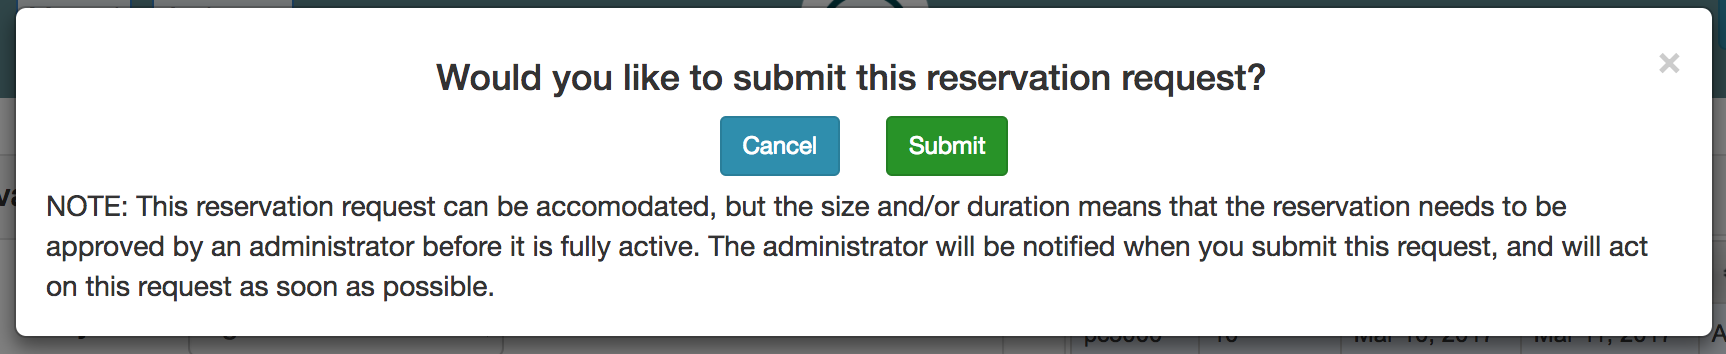 screenshots/apt/reservation-submit.png